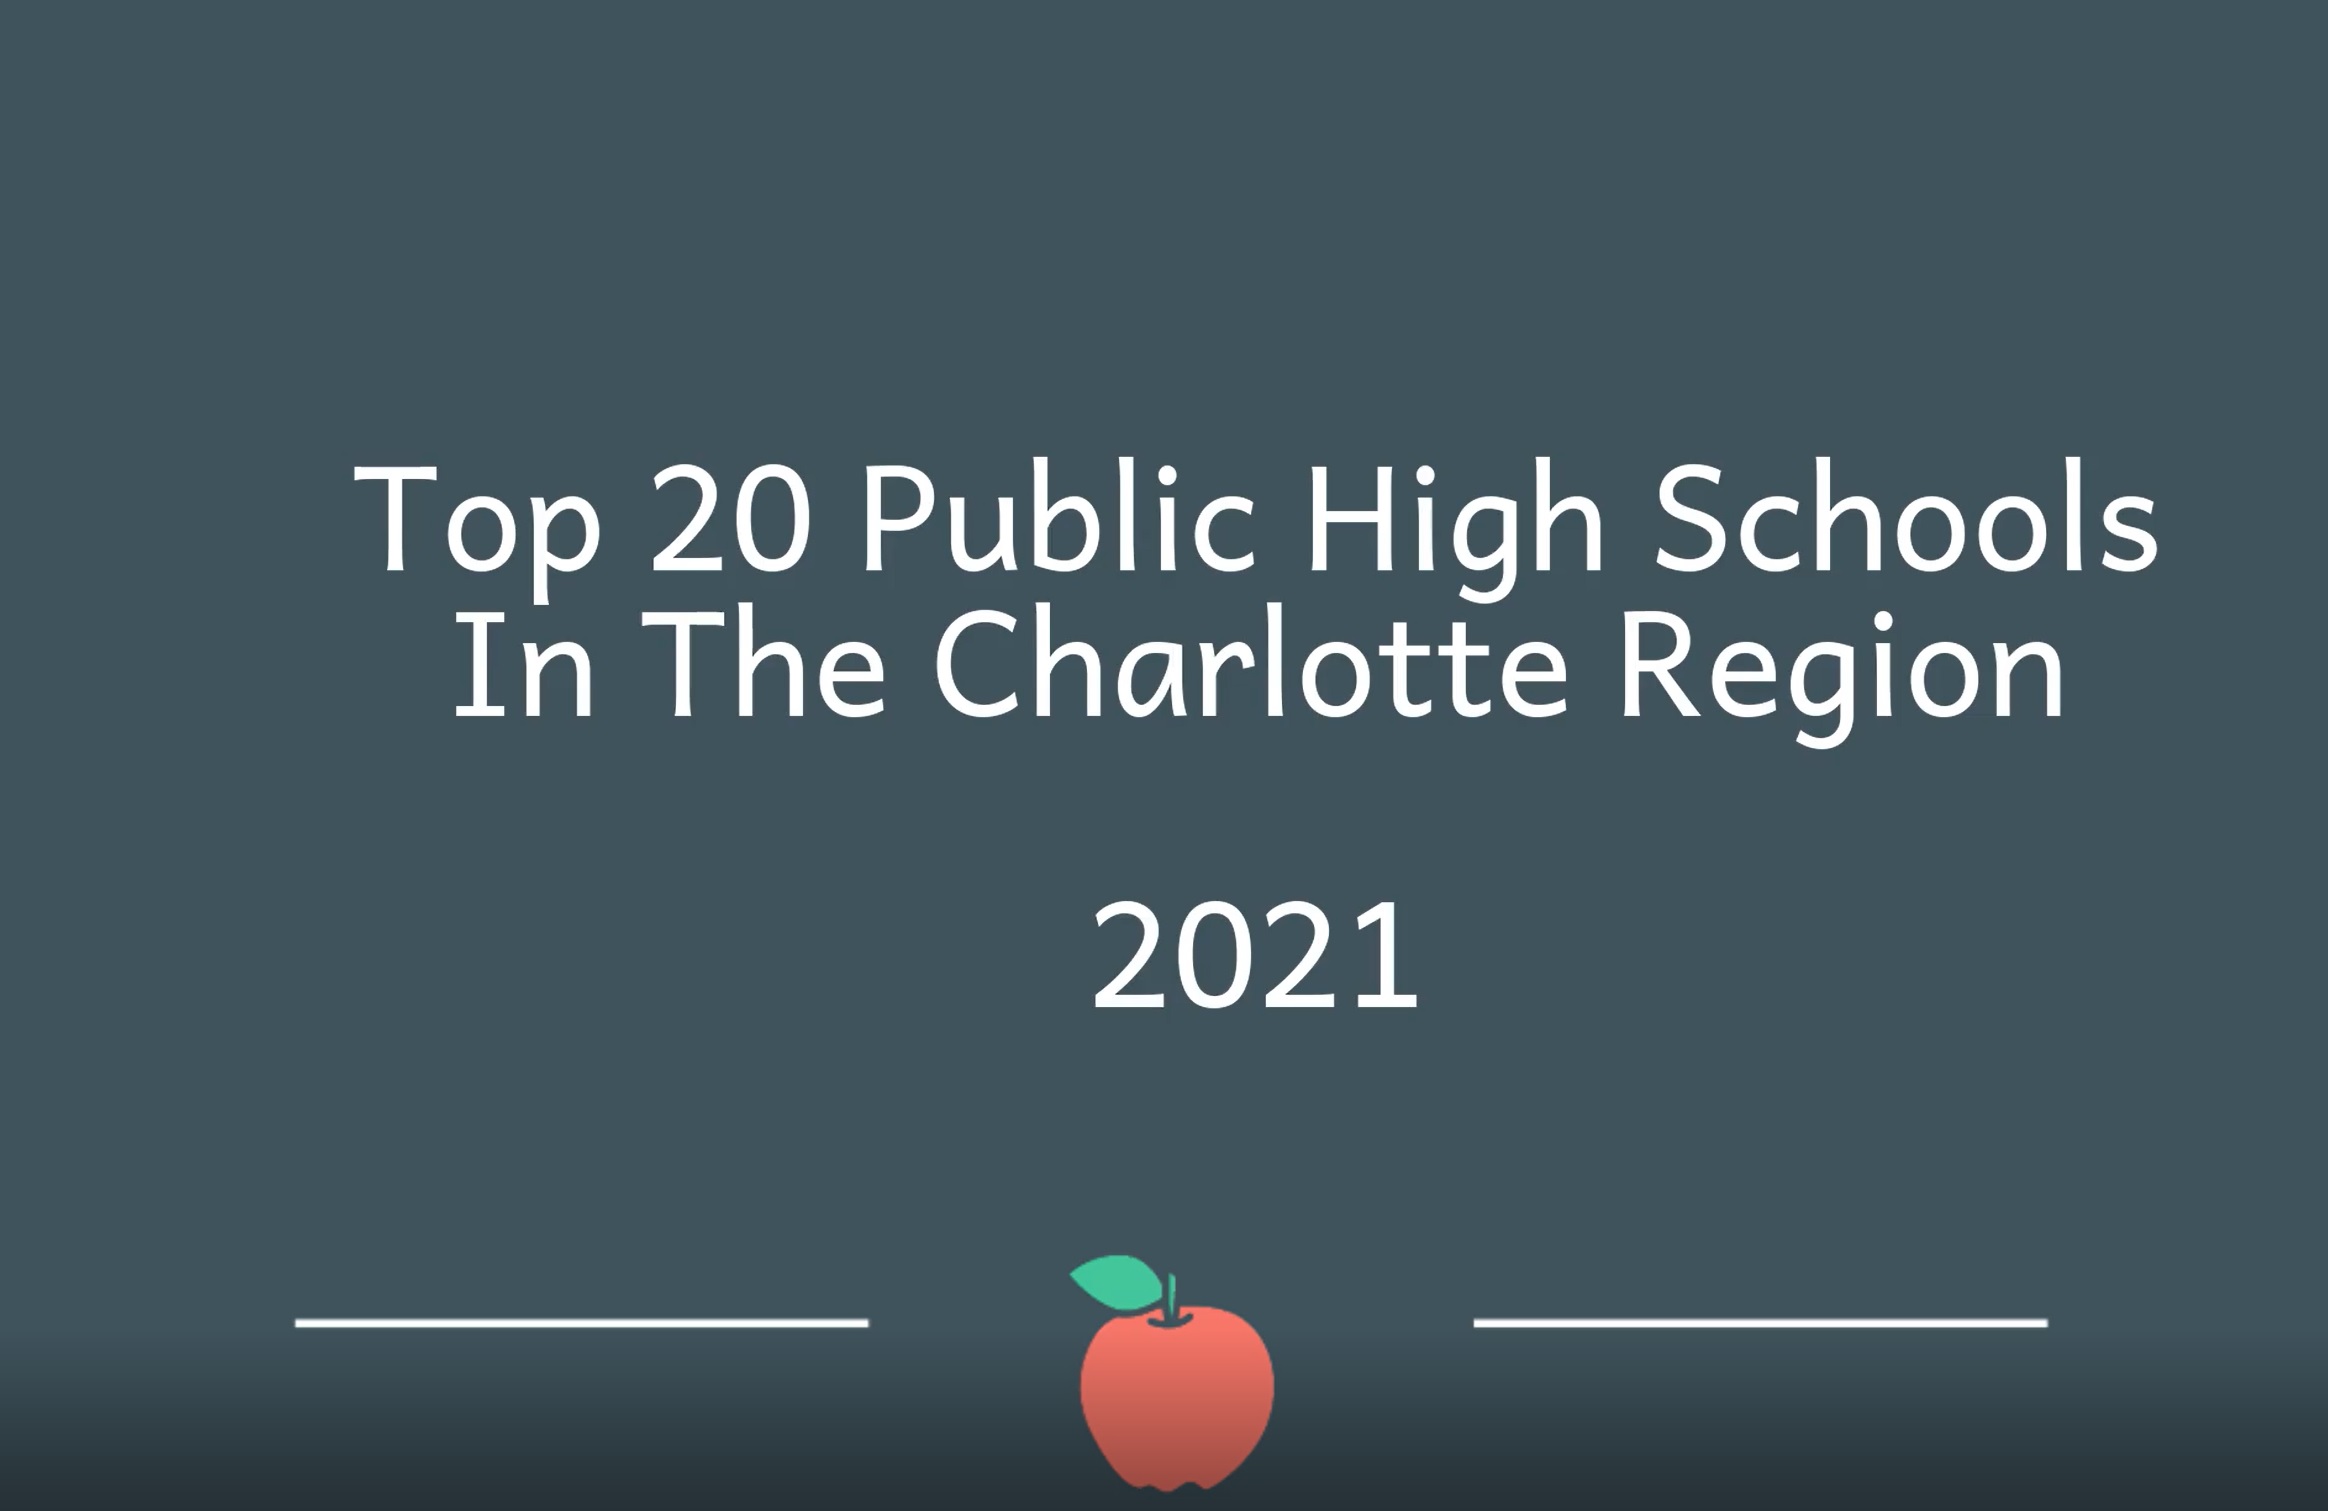 Greater Charlotte To 20 Public High Schools 2021